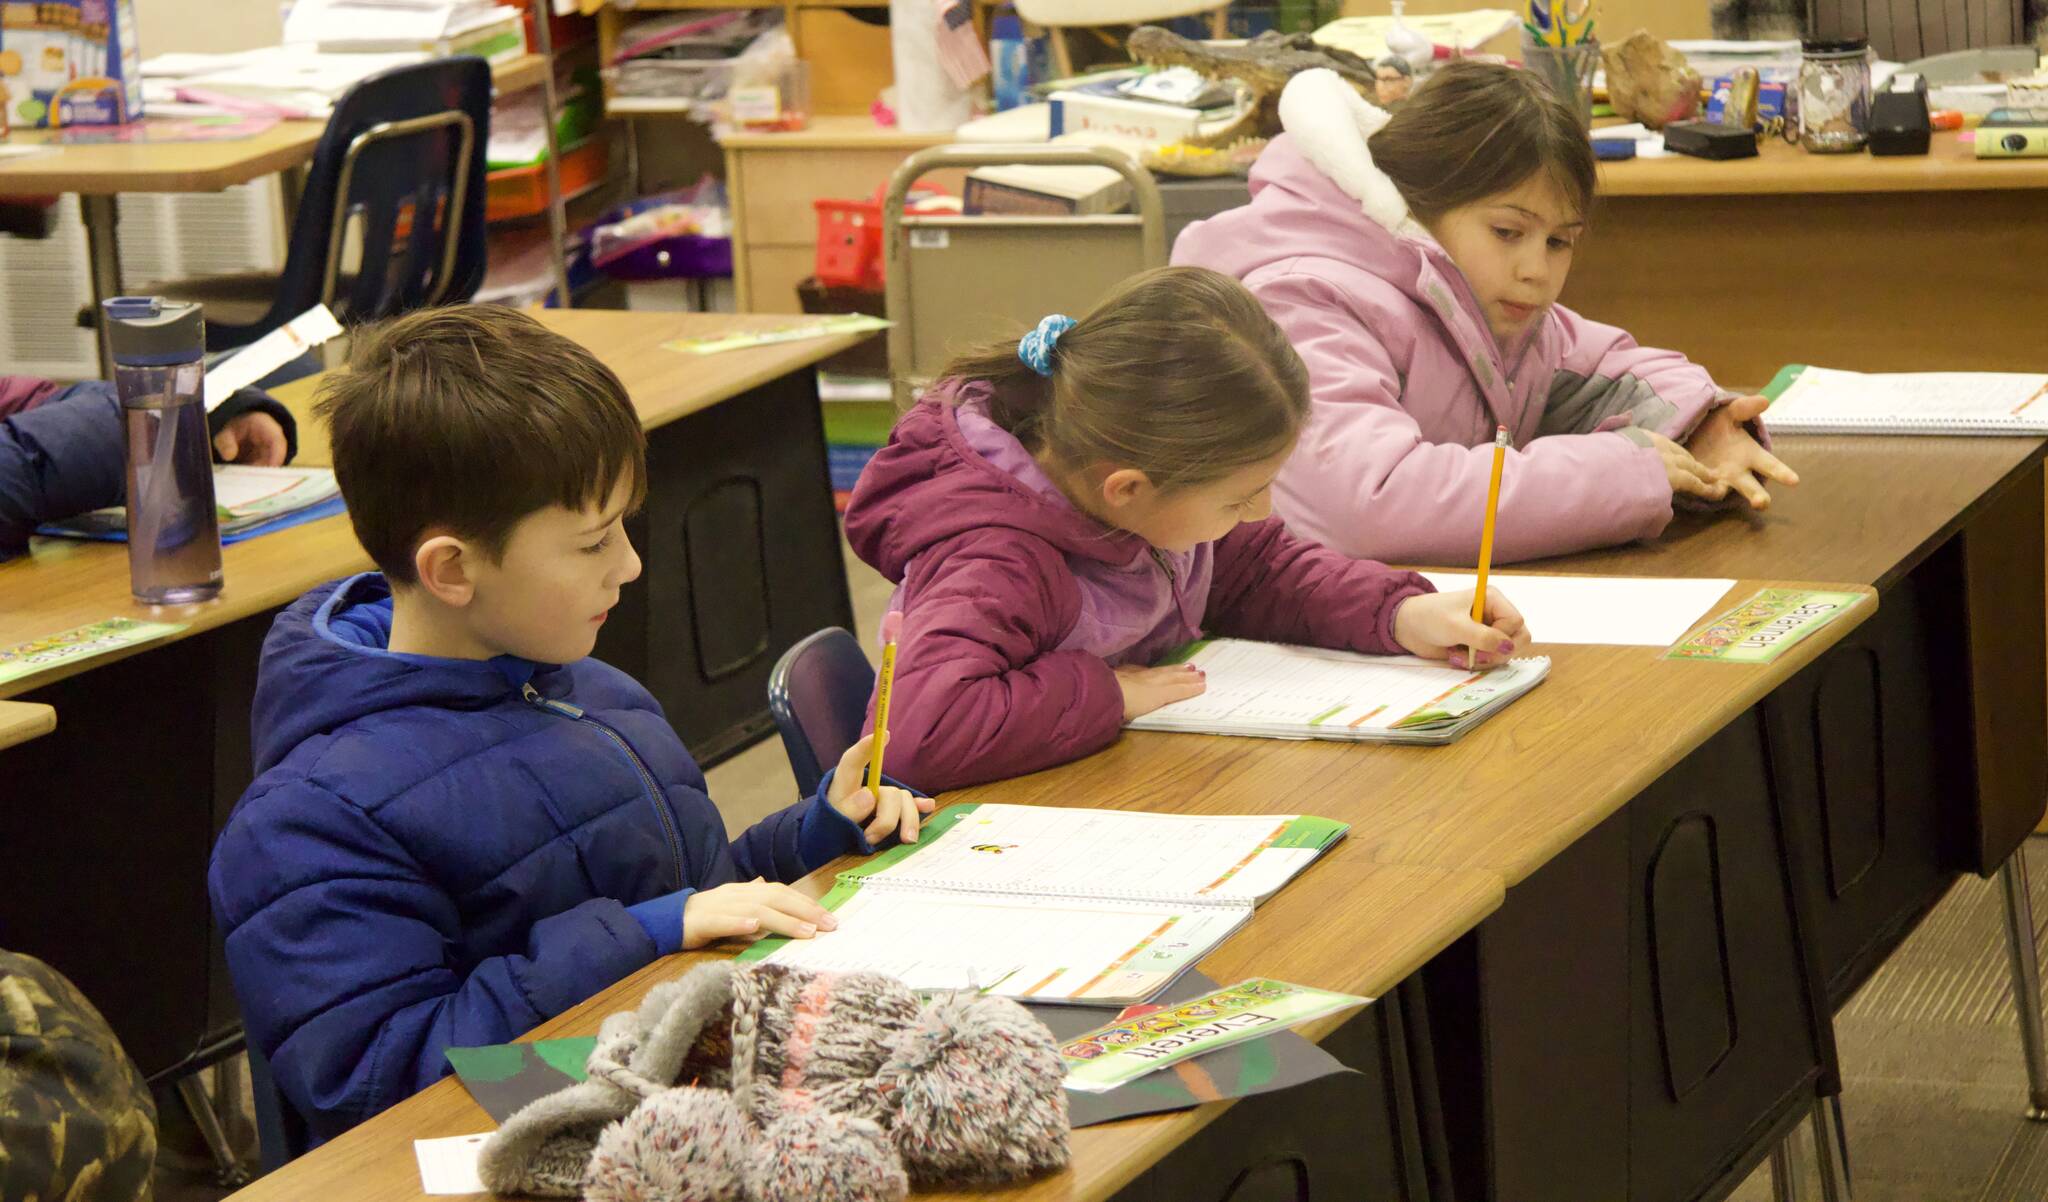 All third graders at Crescent Harbor Elementary have most of their classes in portable classrooms, temporary structures with less heating and no bathrooms or running water. (Photo by Rachel Rosen/Whidbey News-Times)